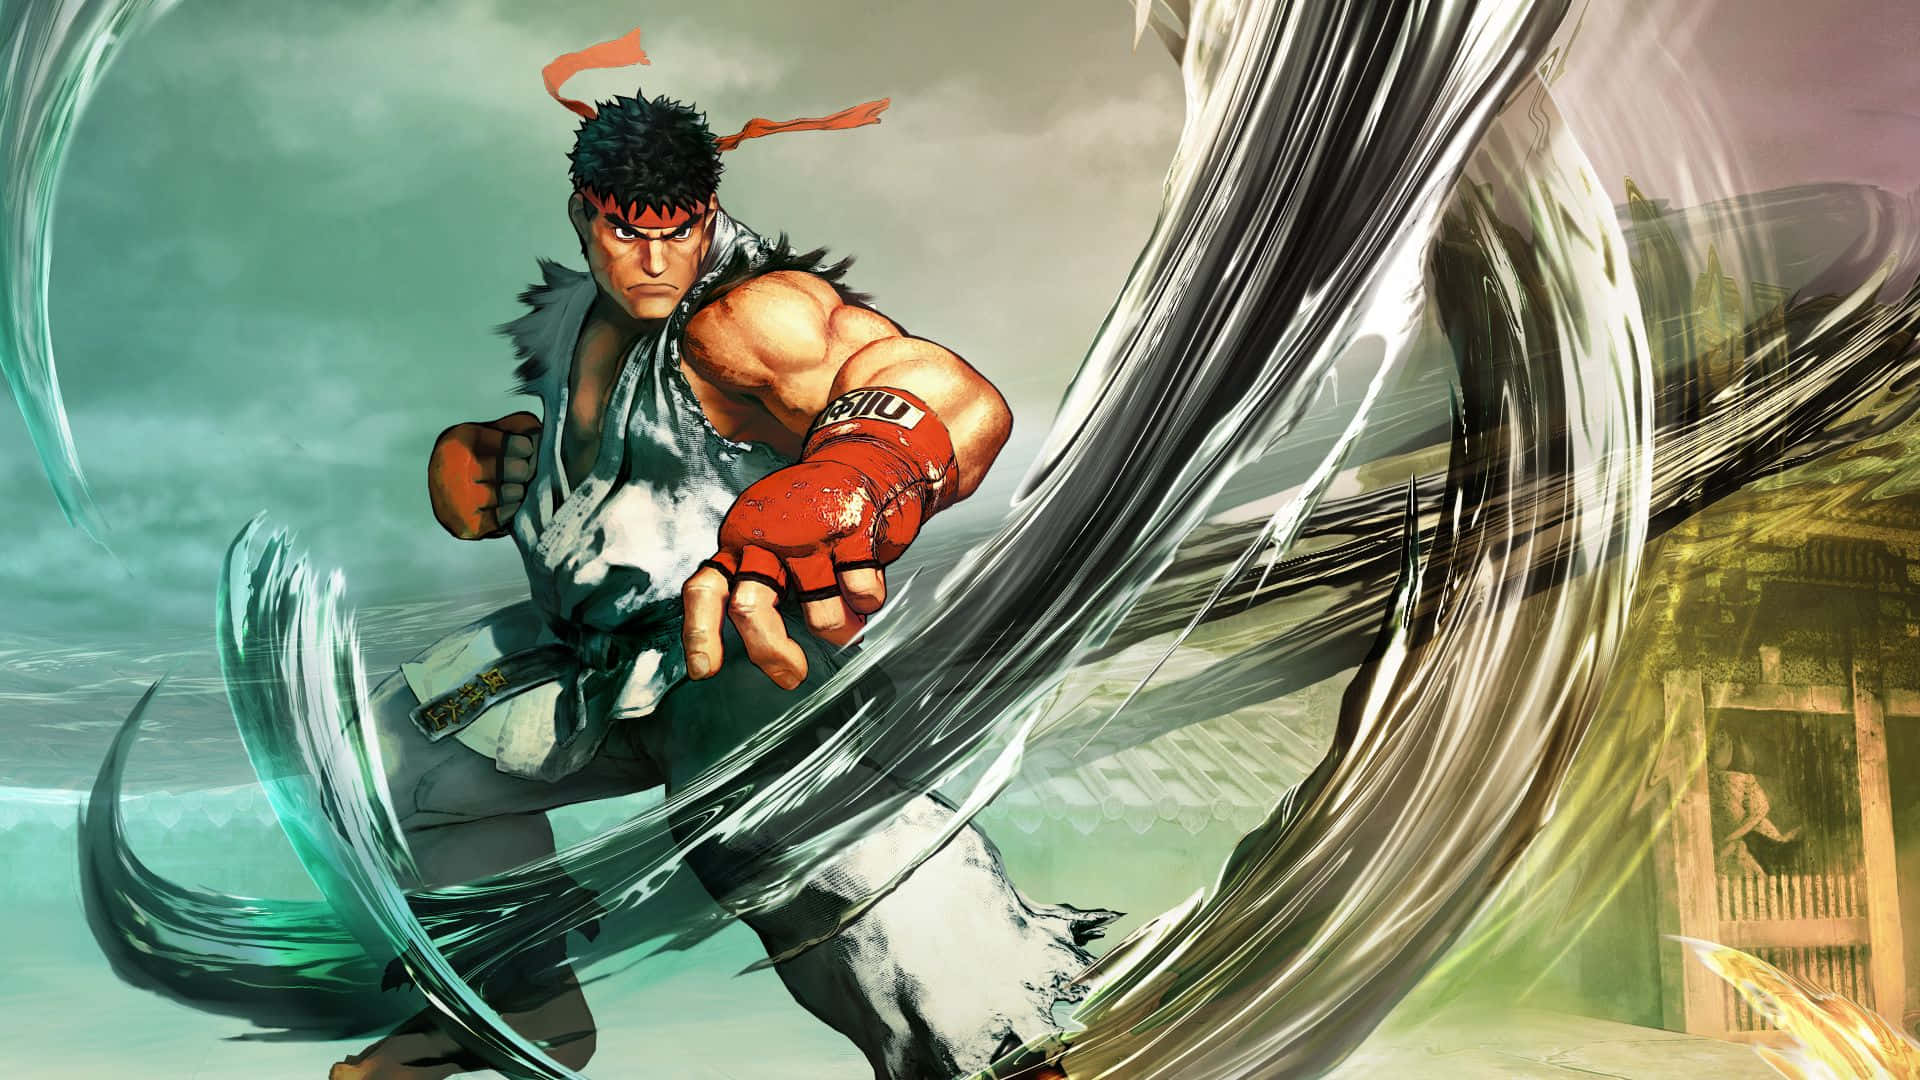 Play as your favorite fighters in Street Fighter